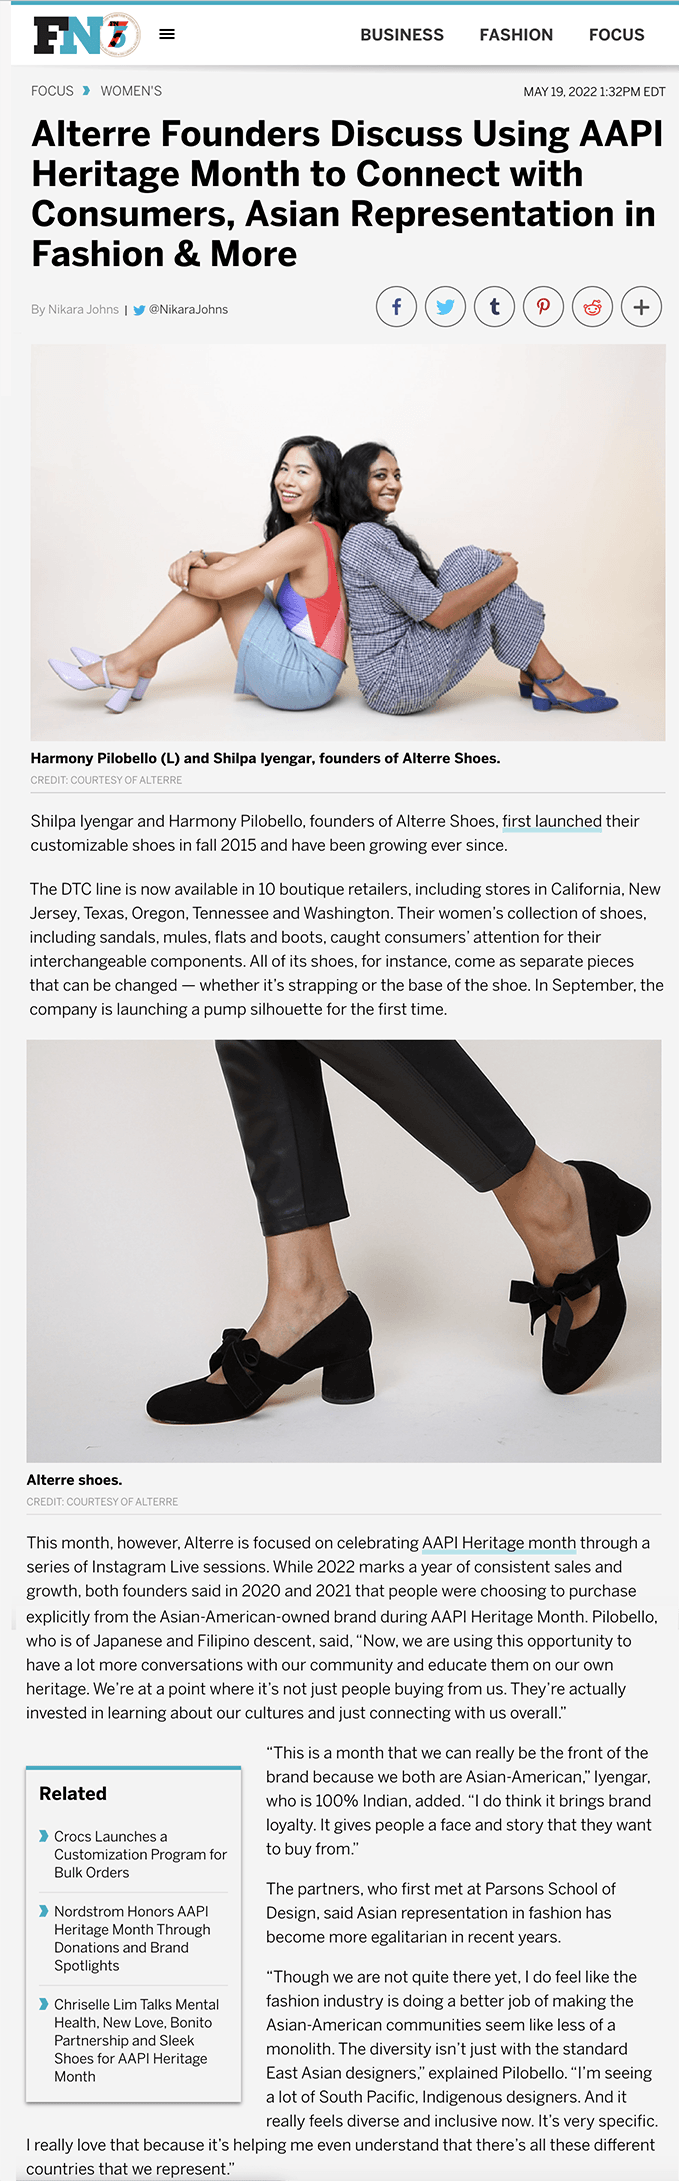 Alterre shoes featured in Footwear News, customizable slides and heels